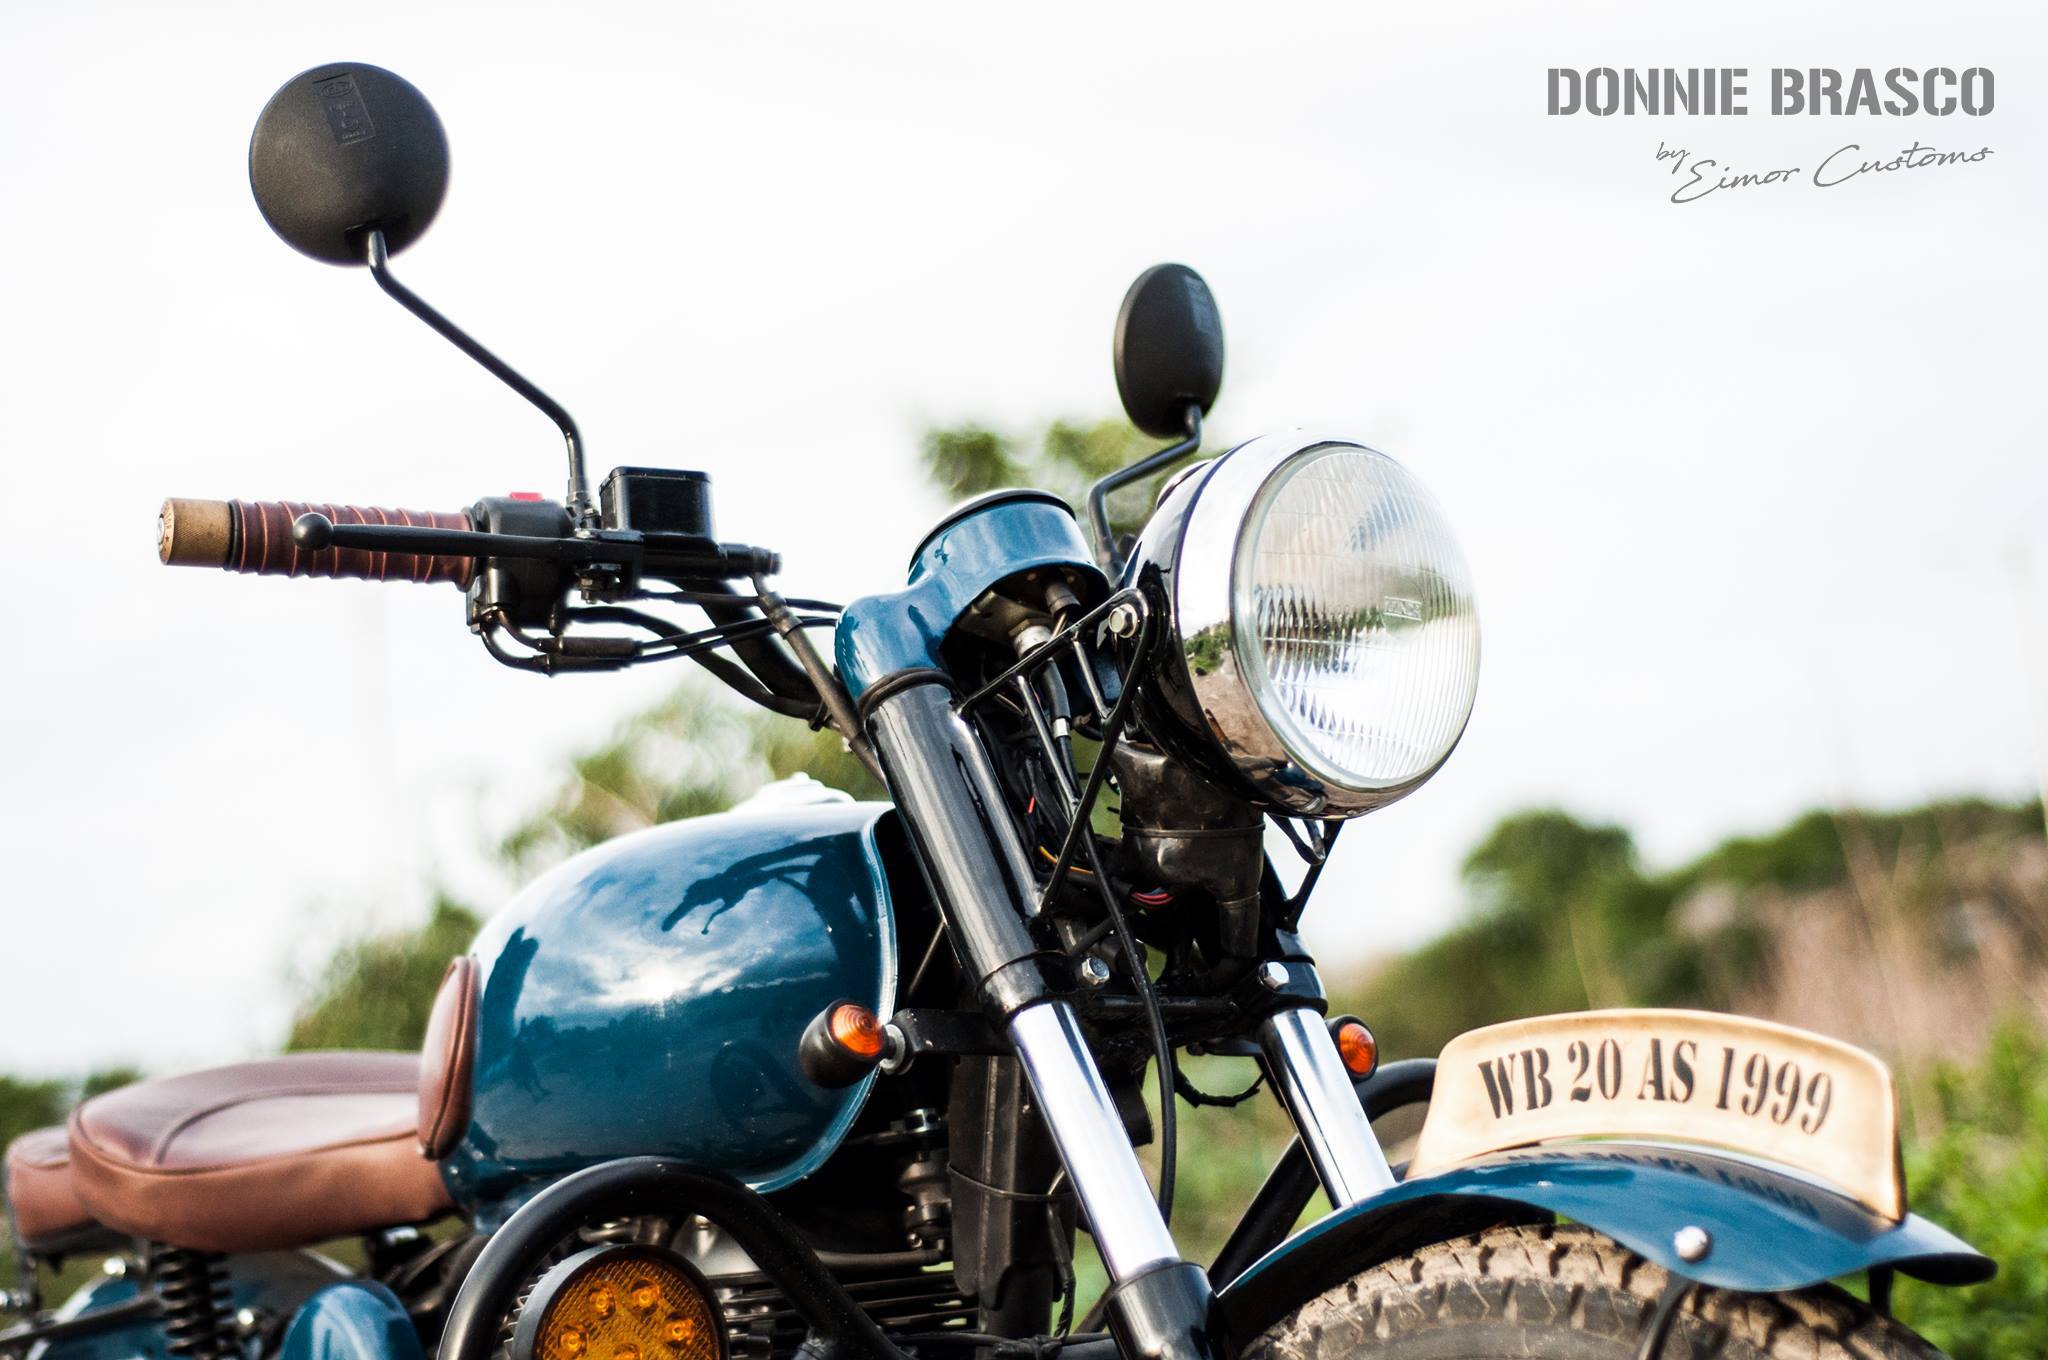 EIMOR Royal Enfield Classic 'Donnie Brasco' Details and Photos - left